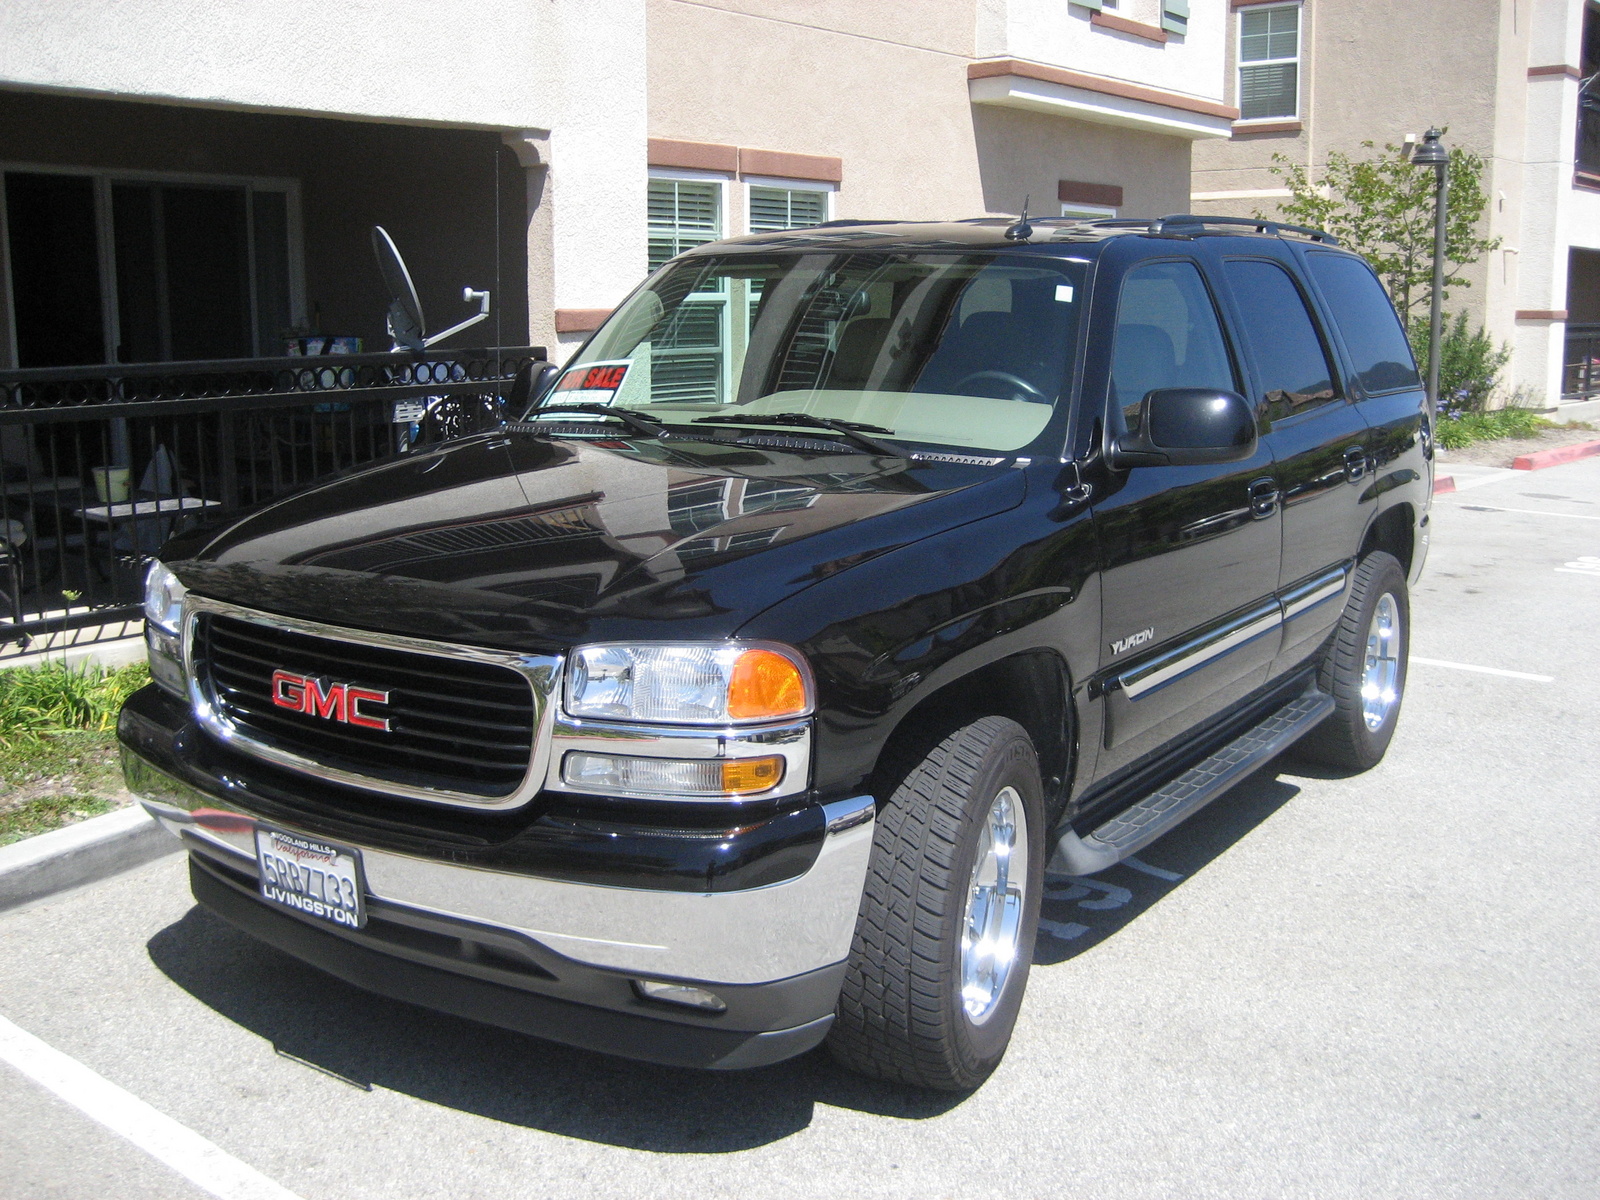 Gmc yukon chevy tahoe ford expedition